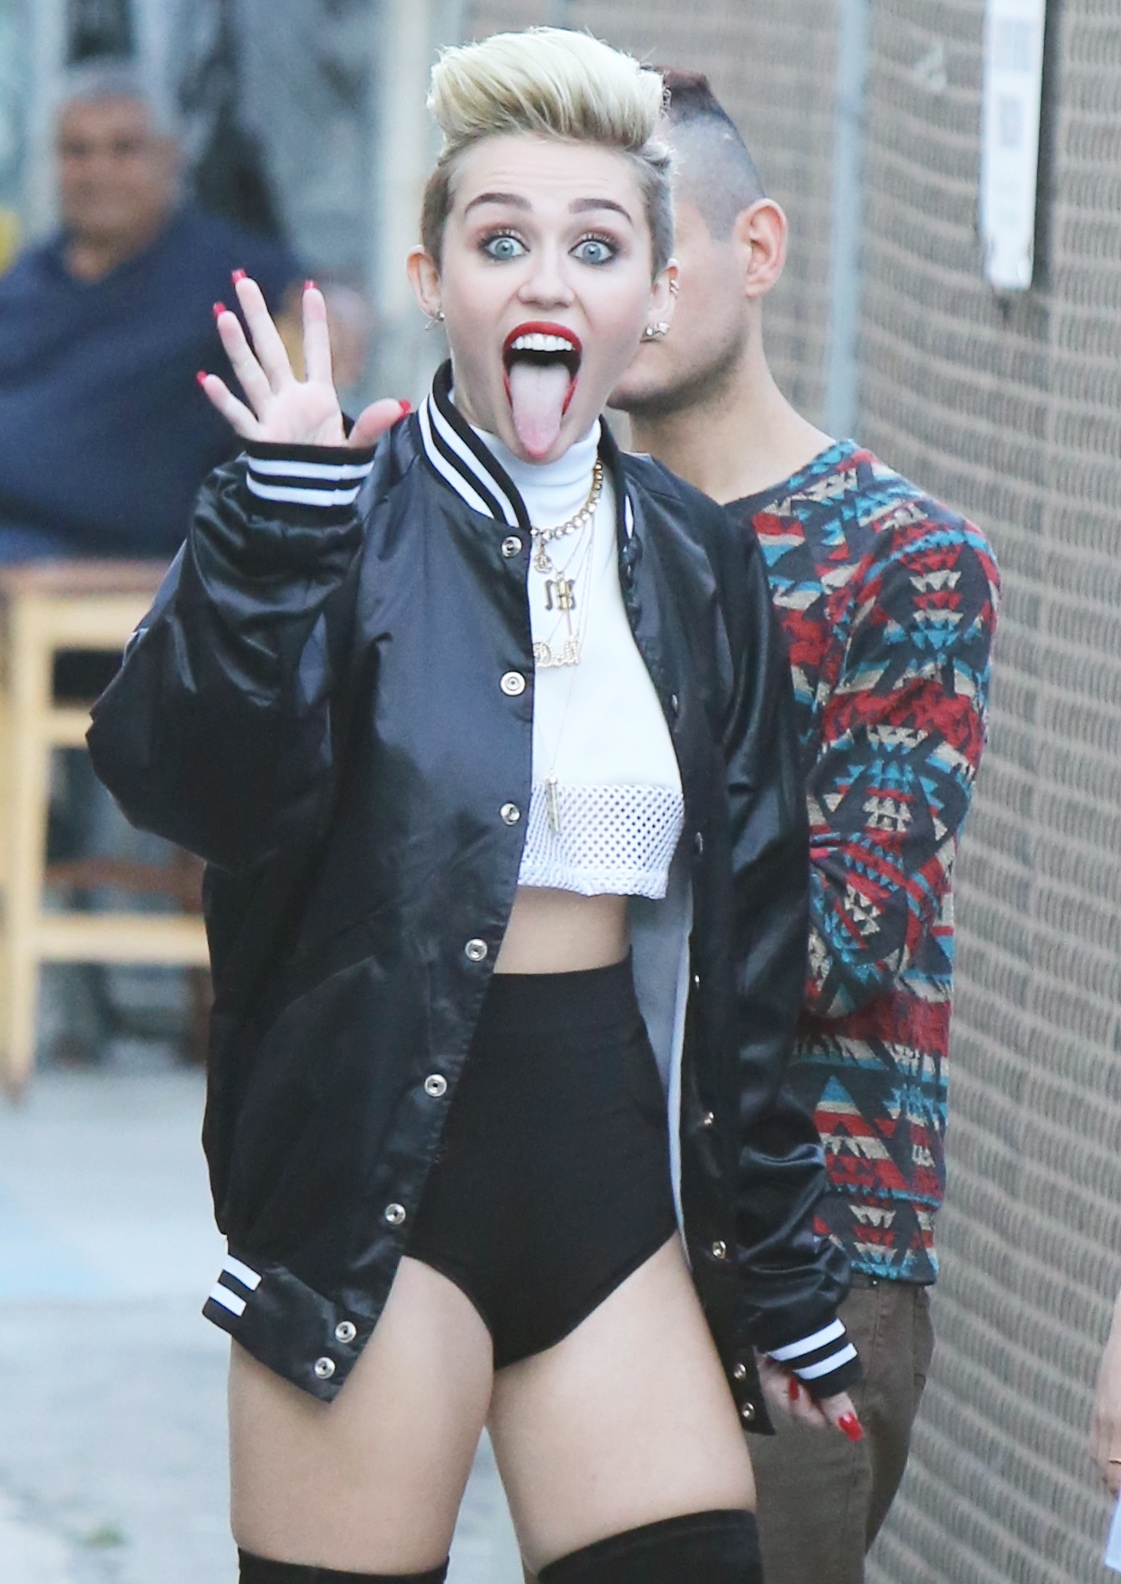 http://www.gotceleb.com/wp-content/uploads/celebrities/miley-cyrus/at-jimmy-kimmel-live-in-los-angeles/Miley-Cyrus-at-Jimmy-Kimmel-Live--11.jpg